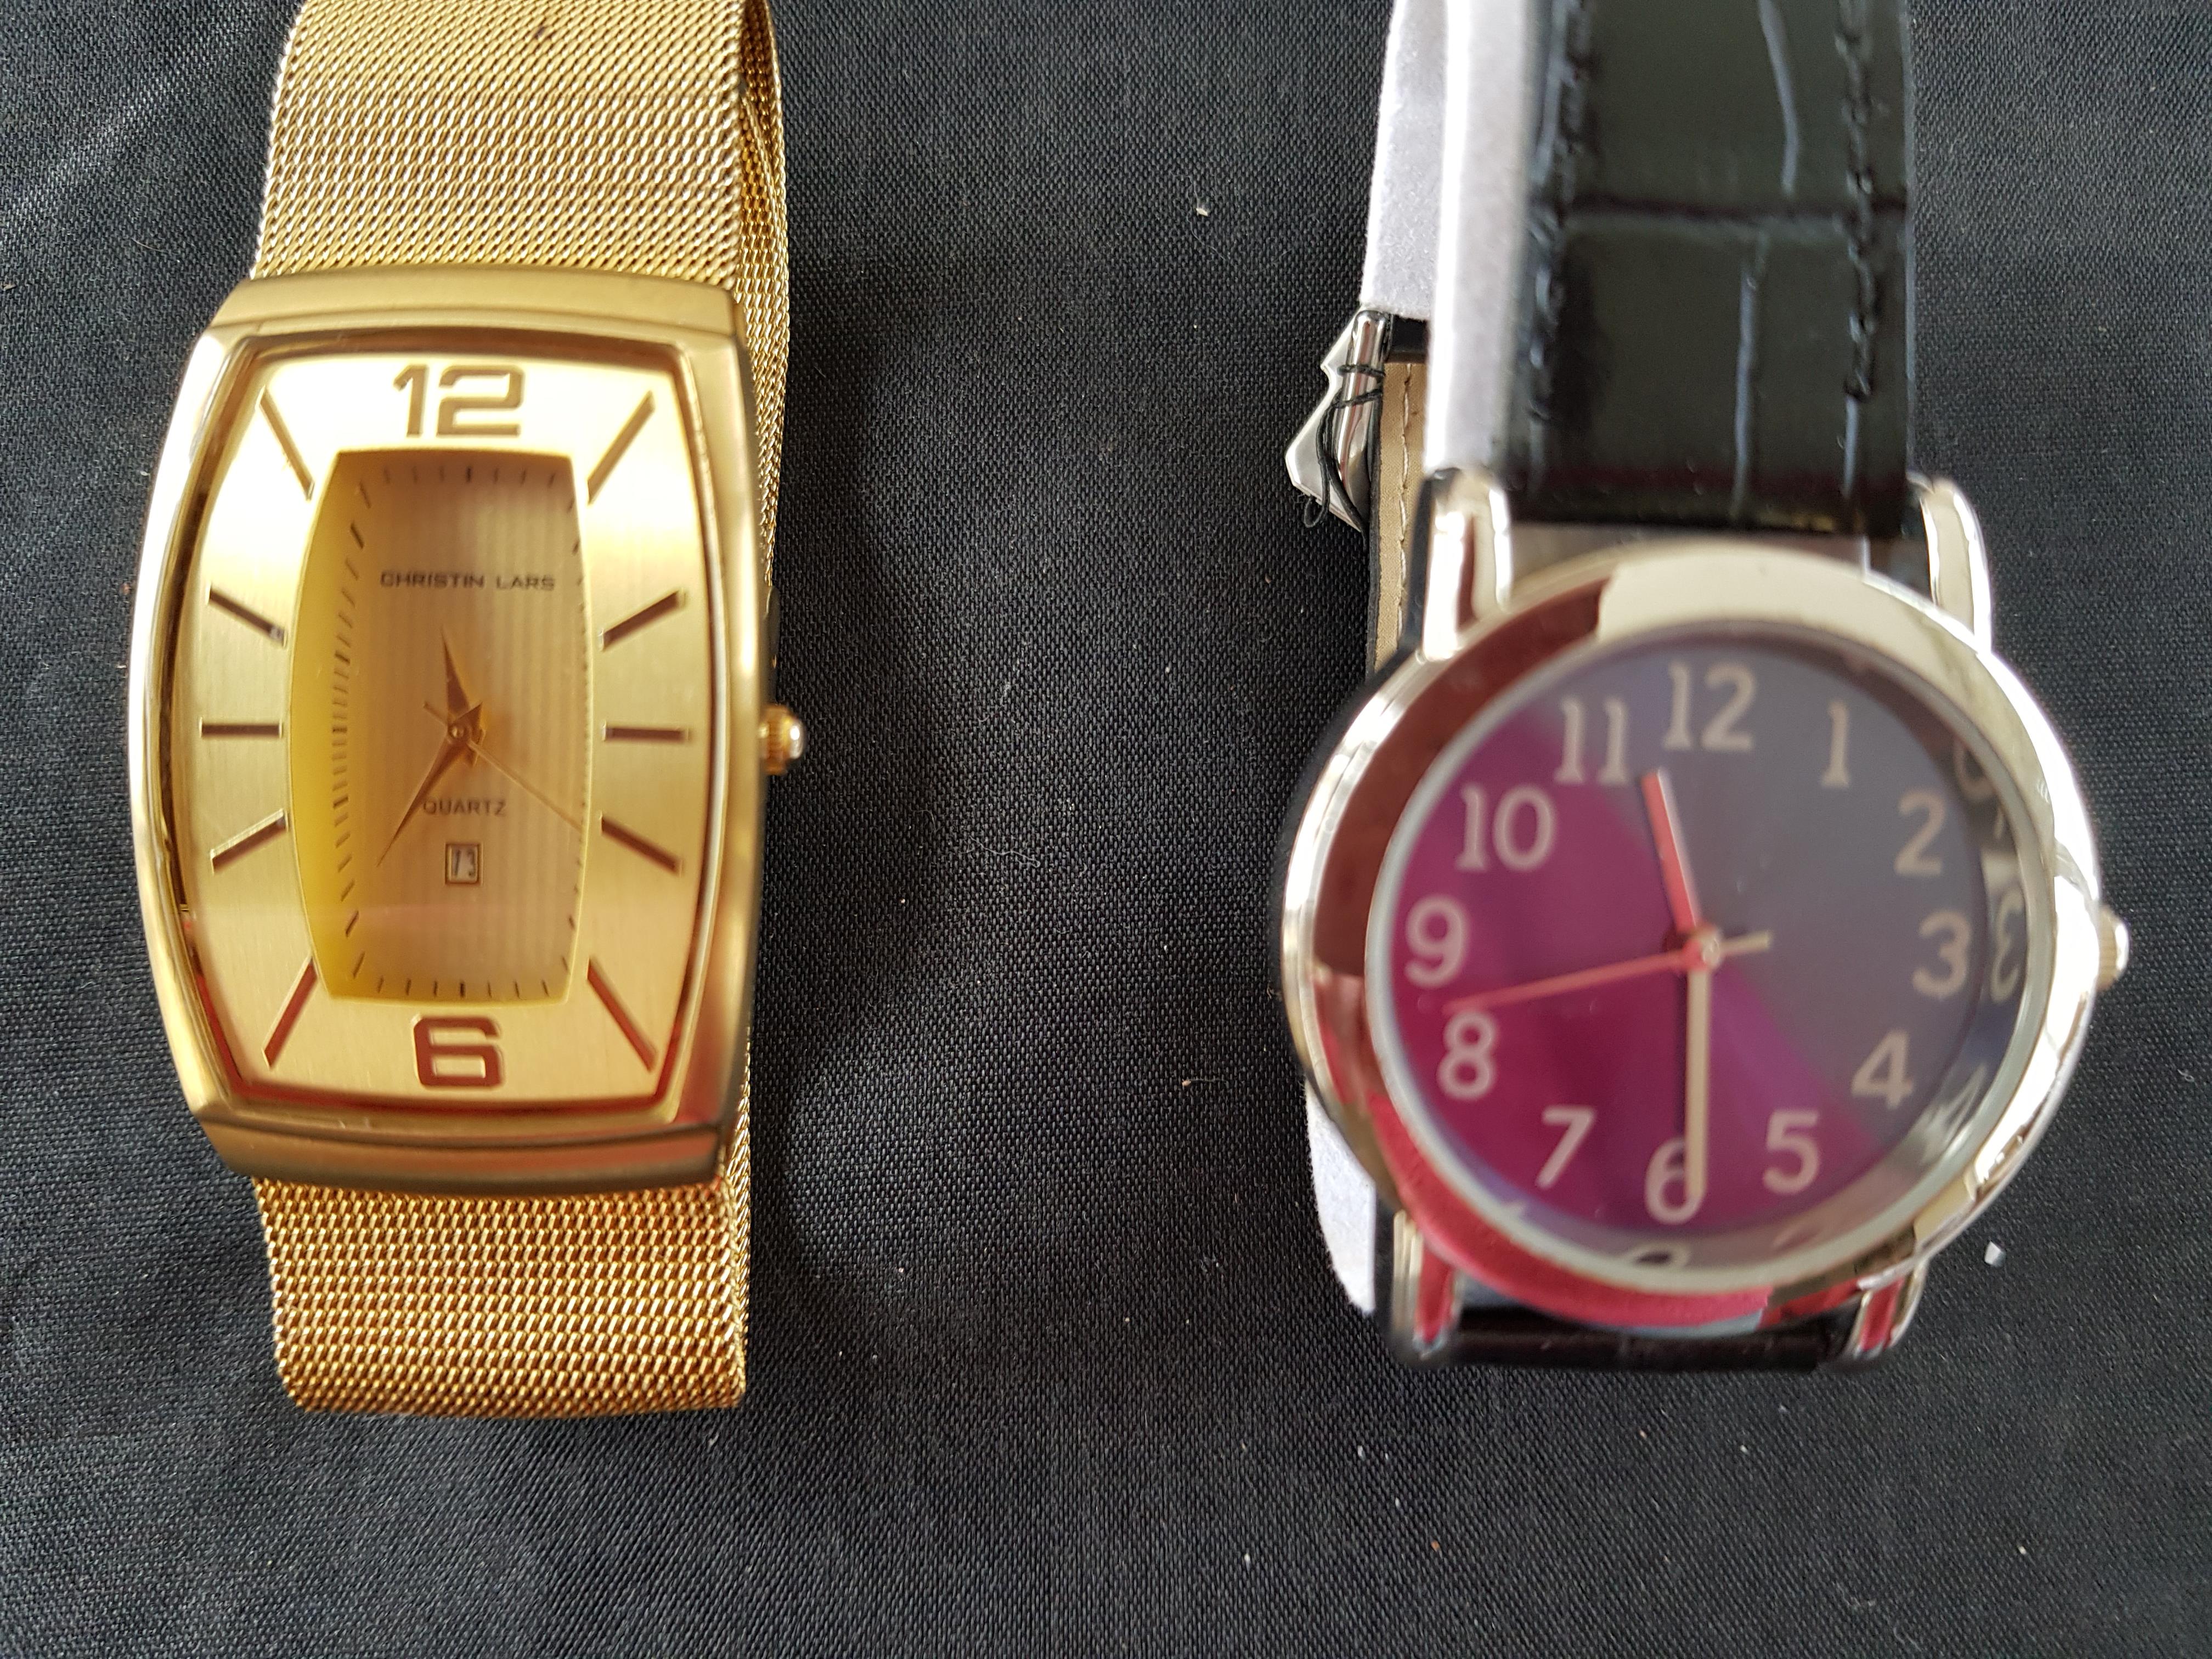 Vintage Christin Lars and Solo Watches